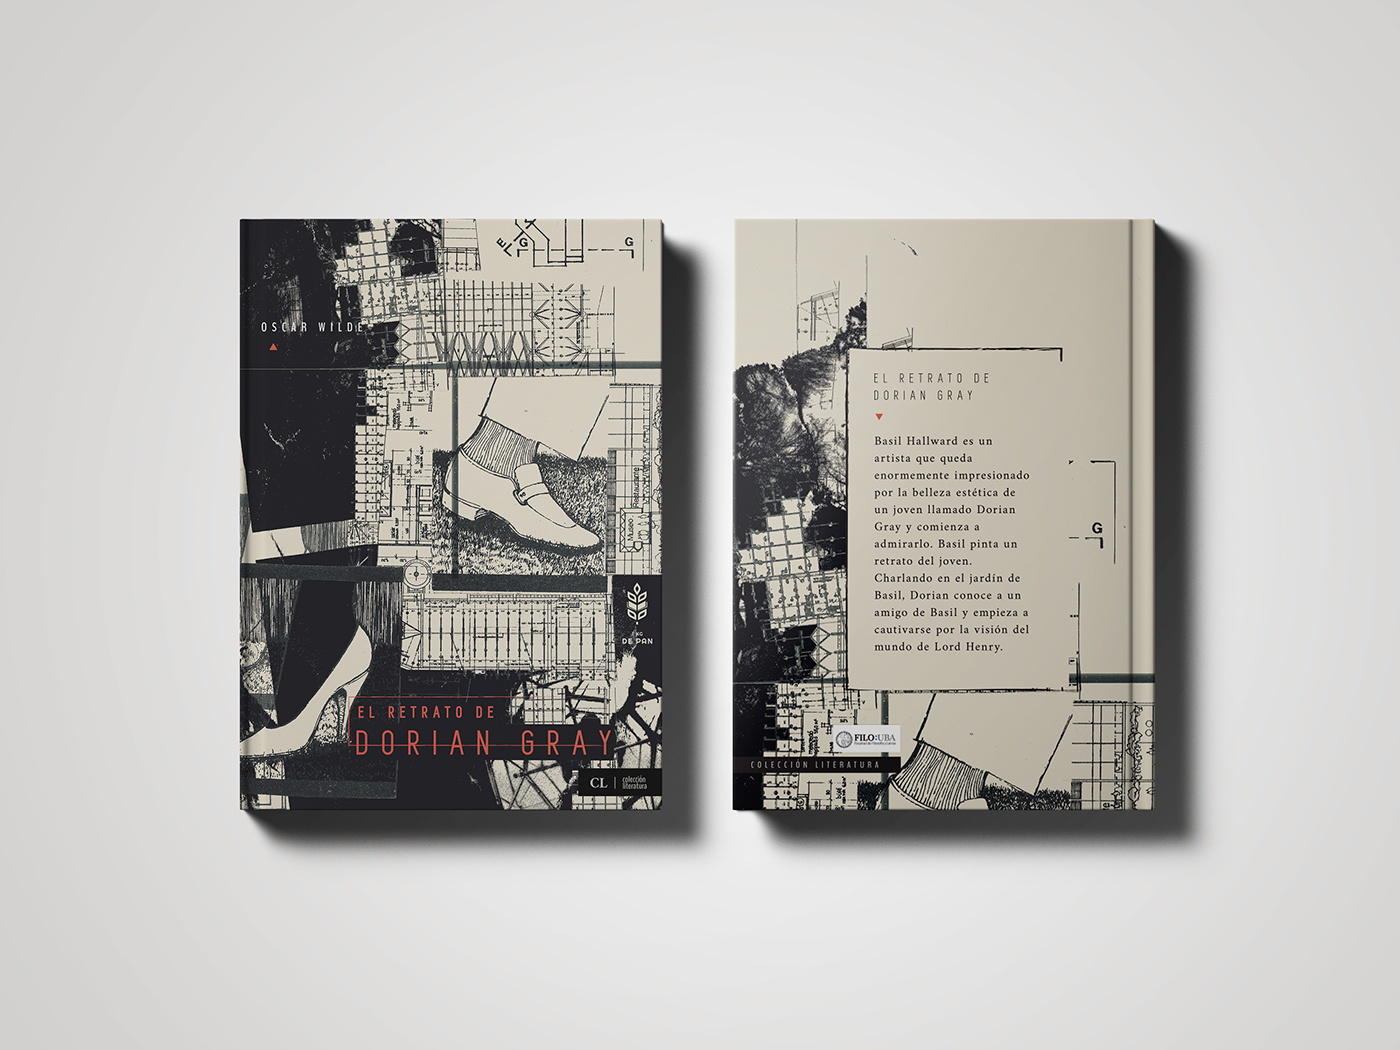 #editorial #book #cover   #Design #typography #art #collage #experimental